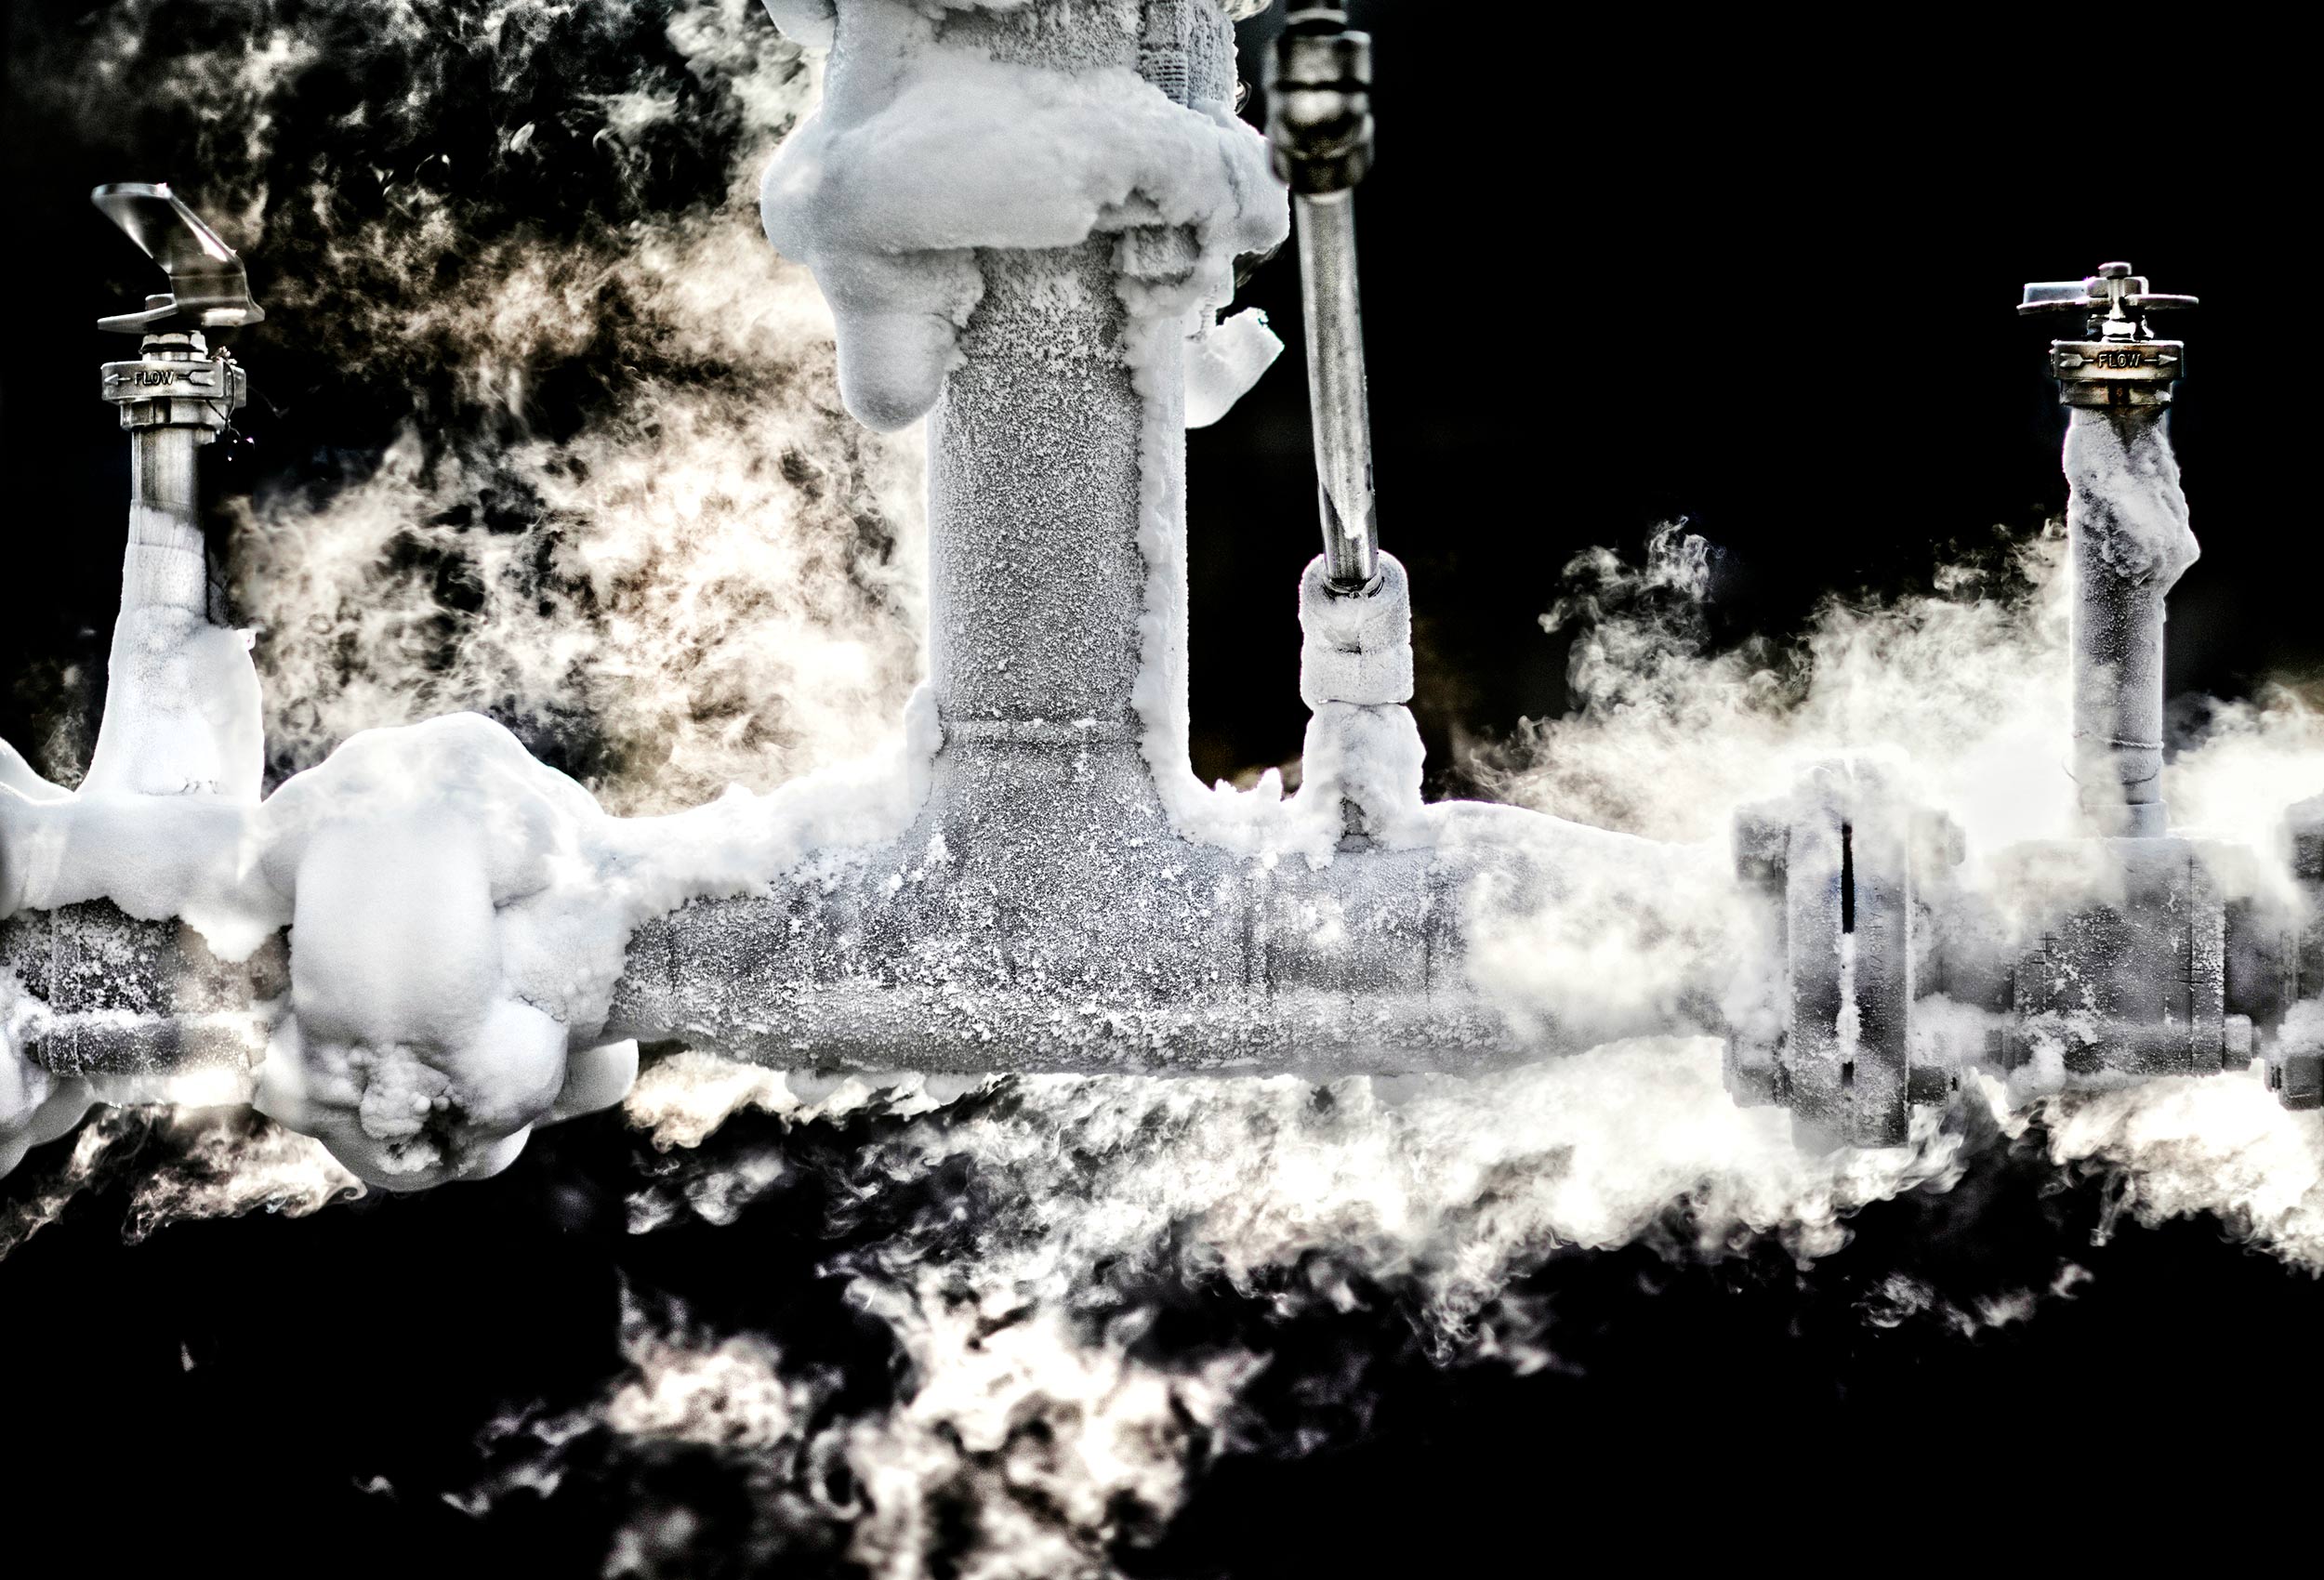 steam pours off of pipes at an air liquide liquid nitrogen plant near montreal quebec